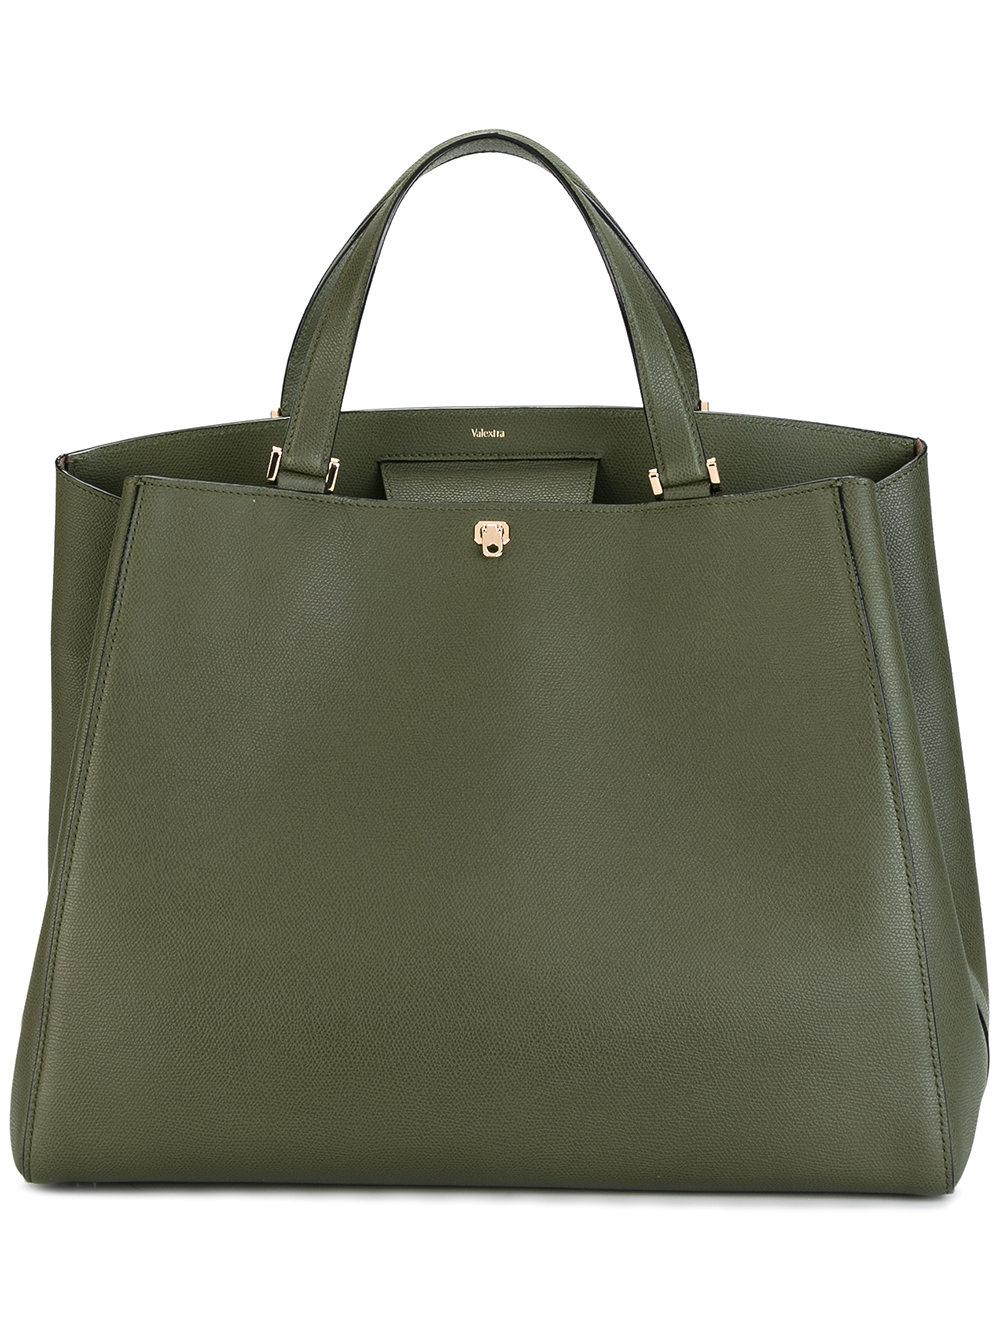 Valextra - Large Tote - Women - Leather - One Size in Green | Lyst